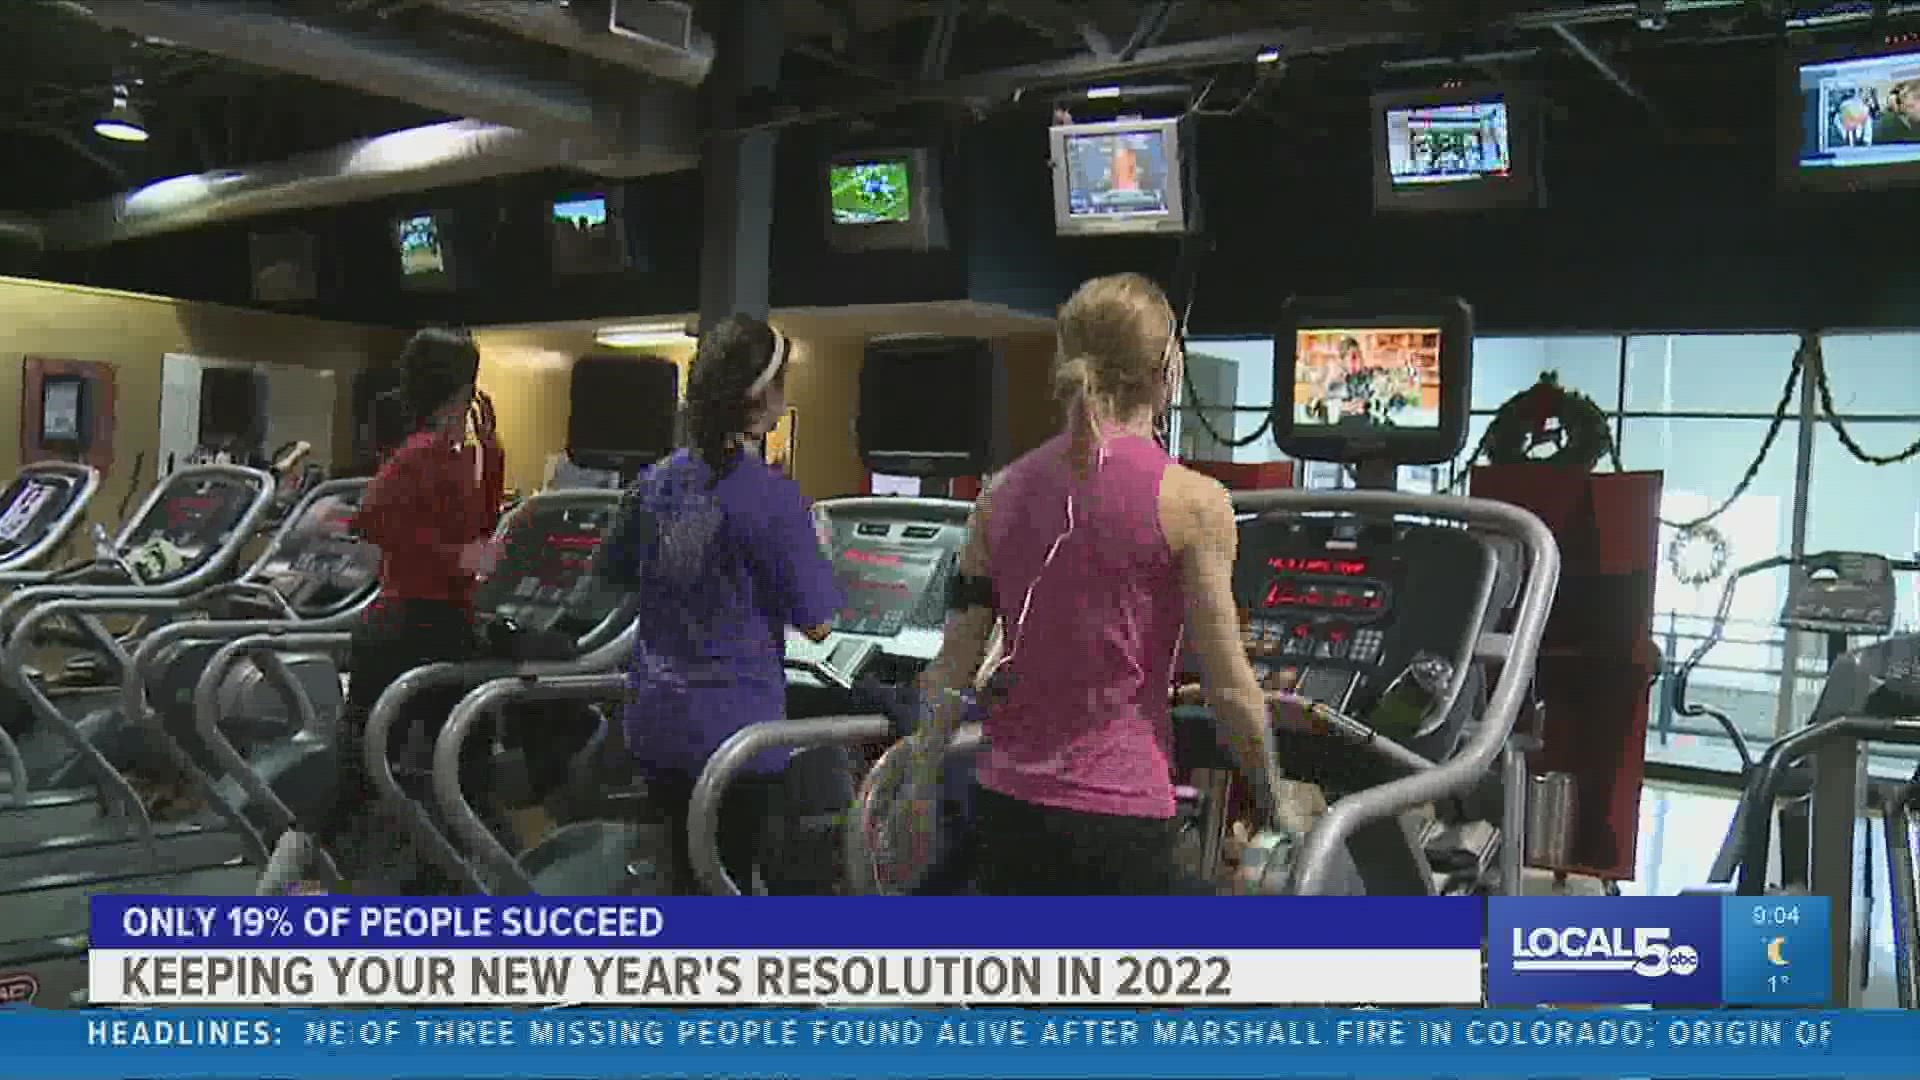 Only 19% of Americans follow through with their resolutions, according to Scranton University.